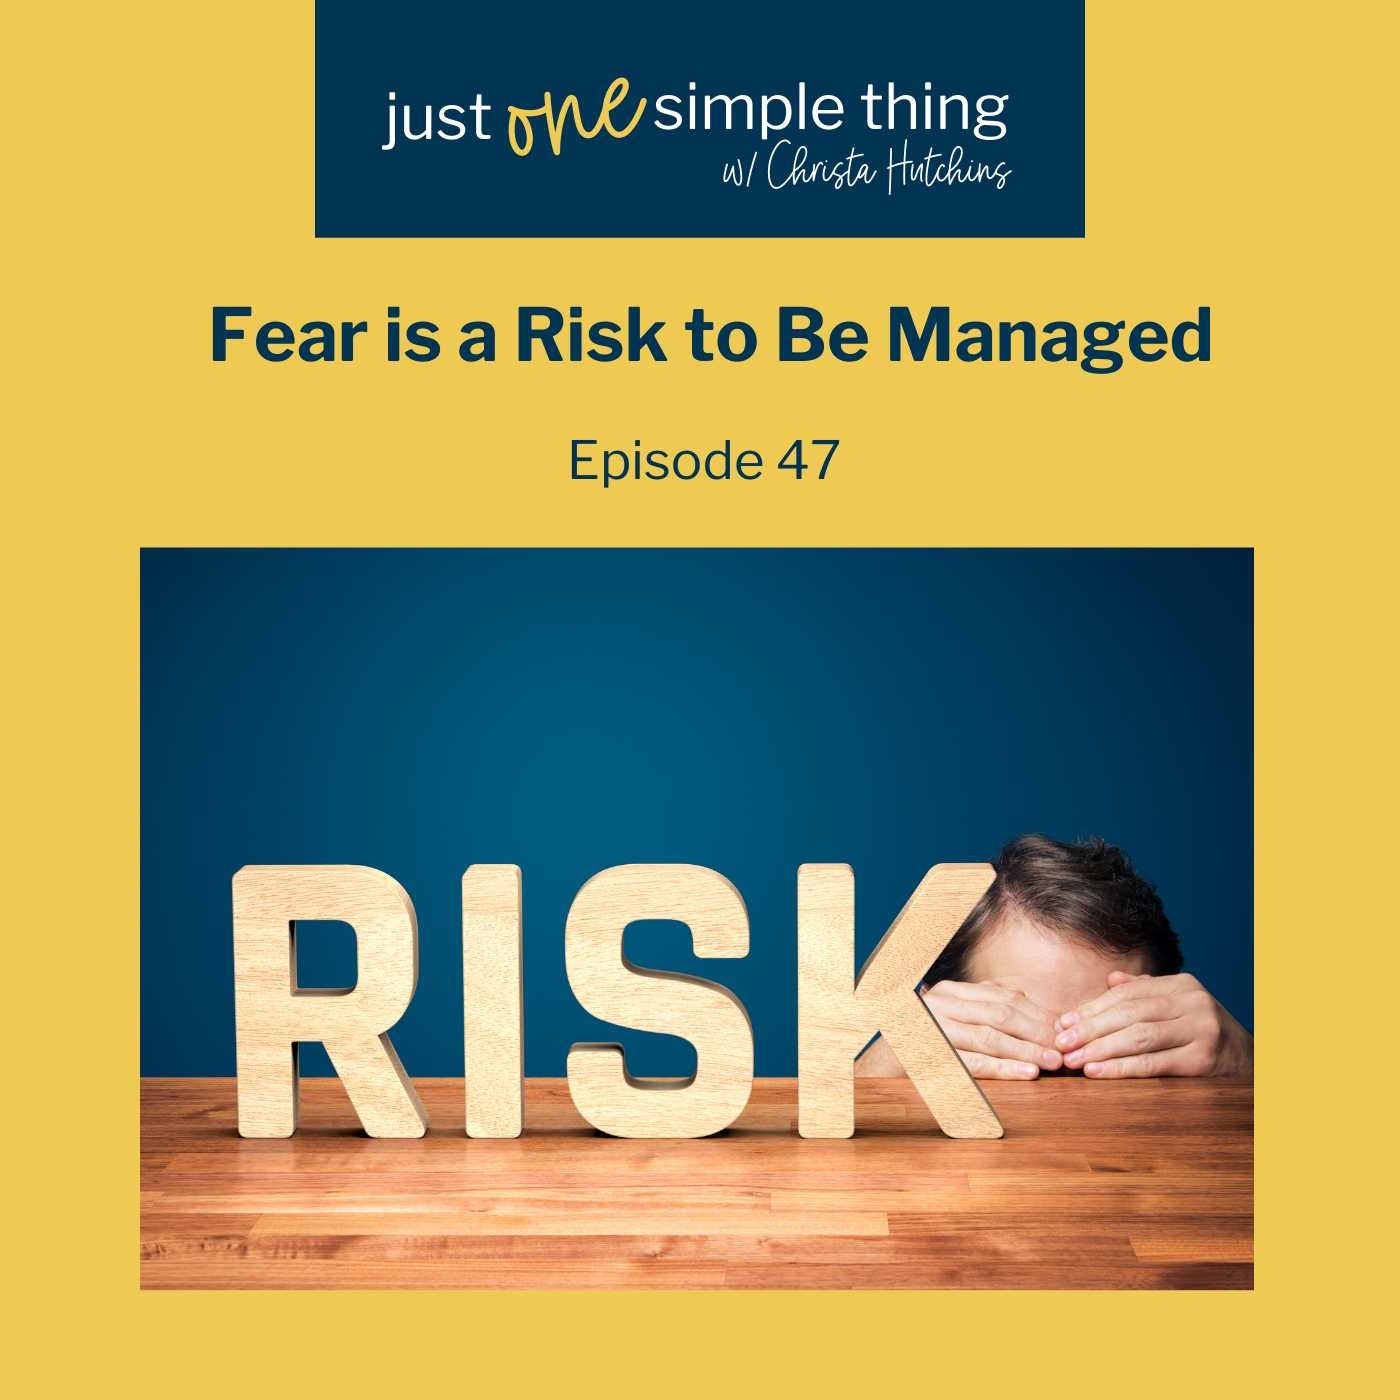 Fear is a Risk to be Managed